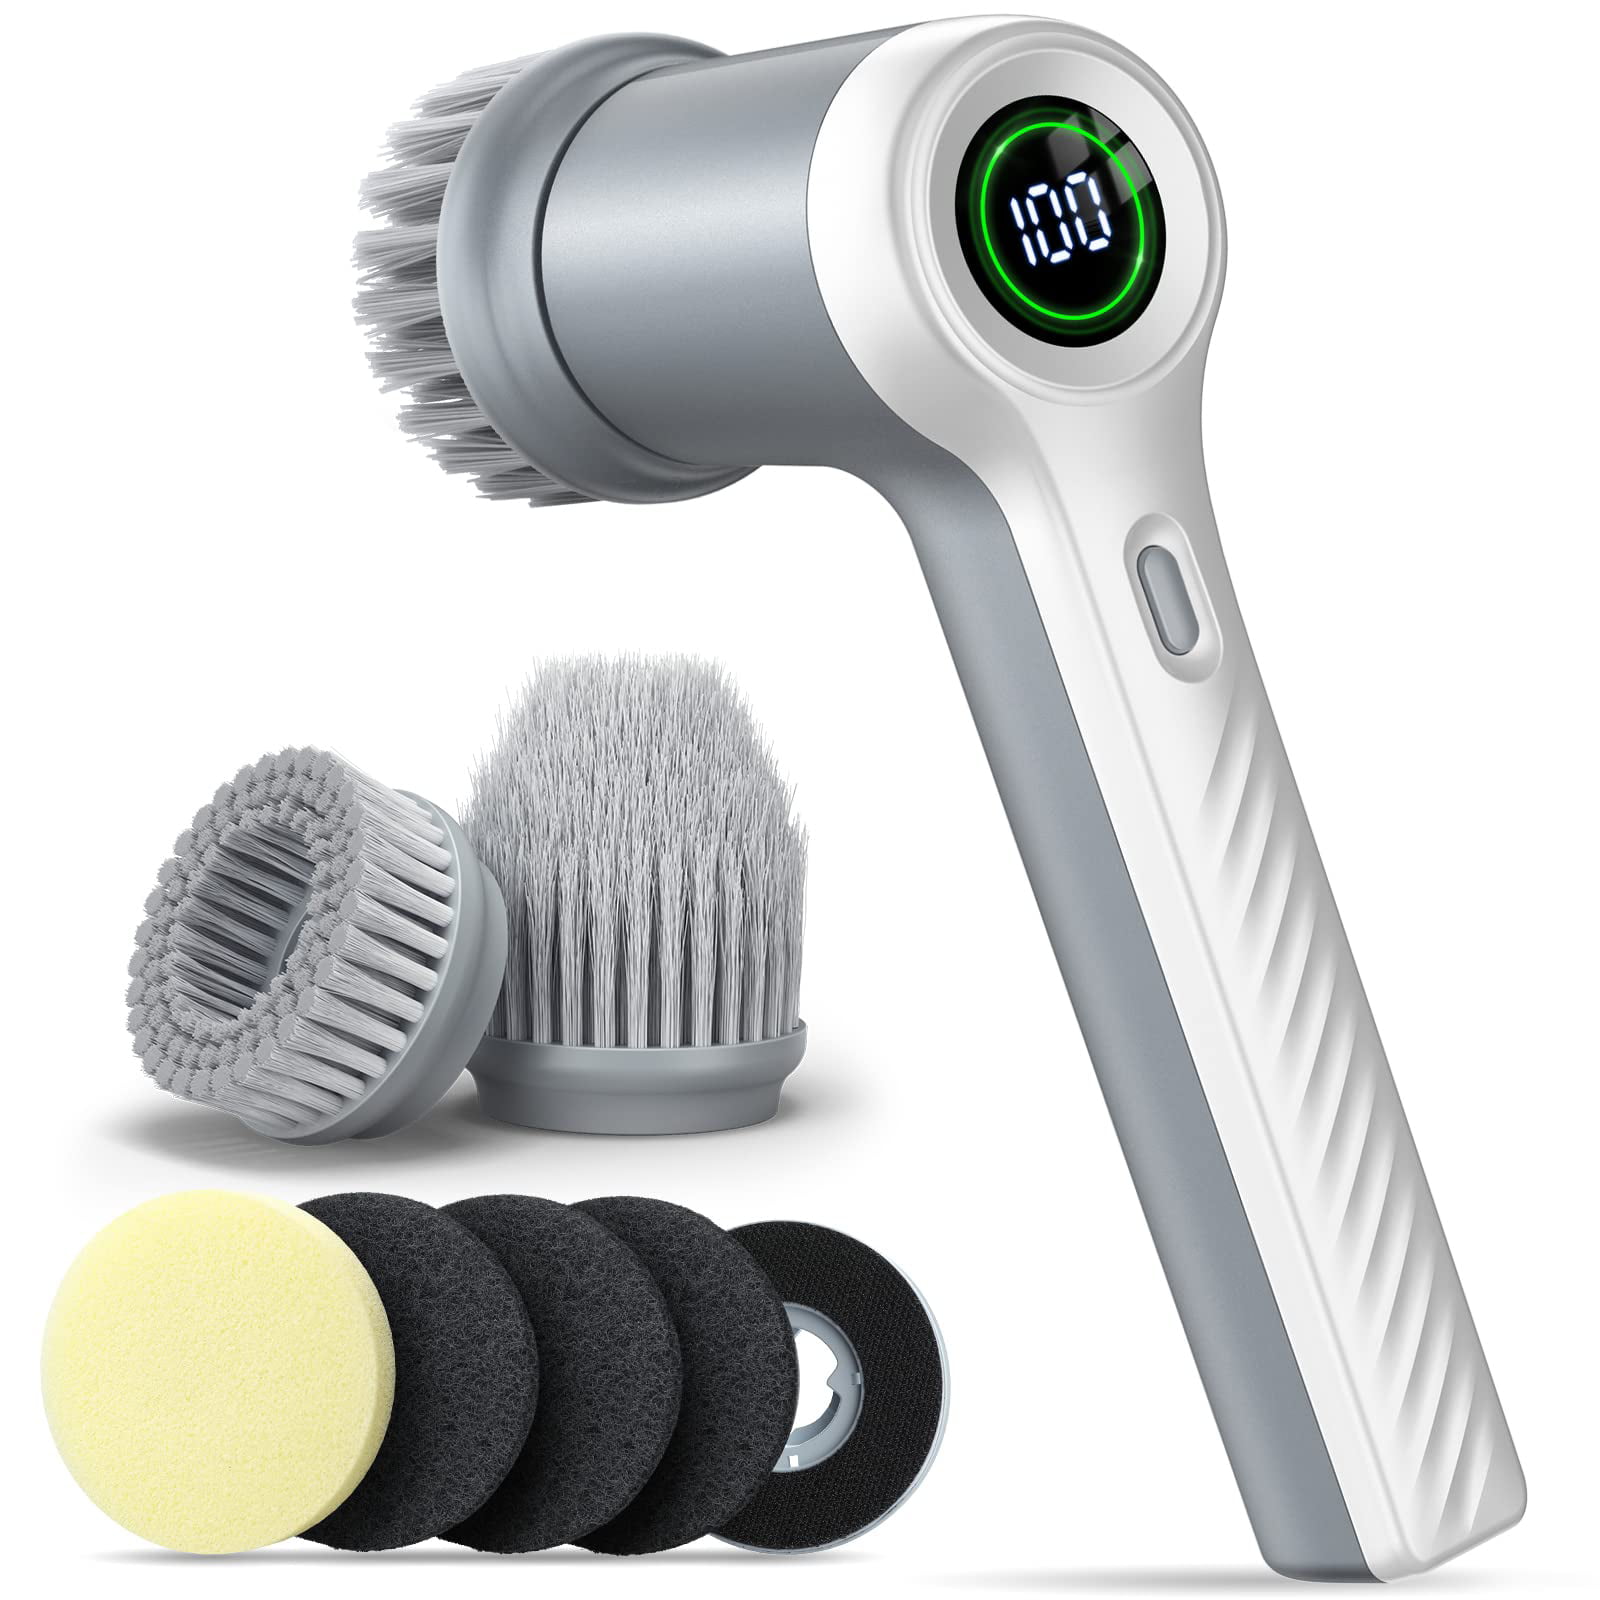 QBBQAAQTT Electric Spin Scrubber, Cordless Cleaning Brush with 8  Replaceable Drill Brush Heads and Adjustable Handle, Electric Scrubber for  Bathroom